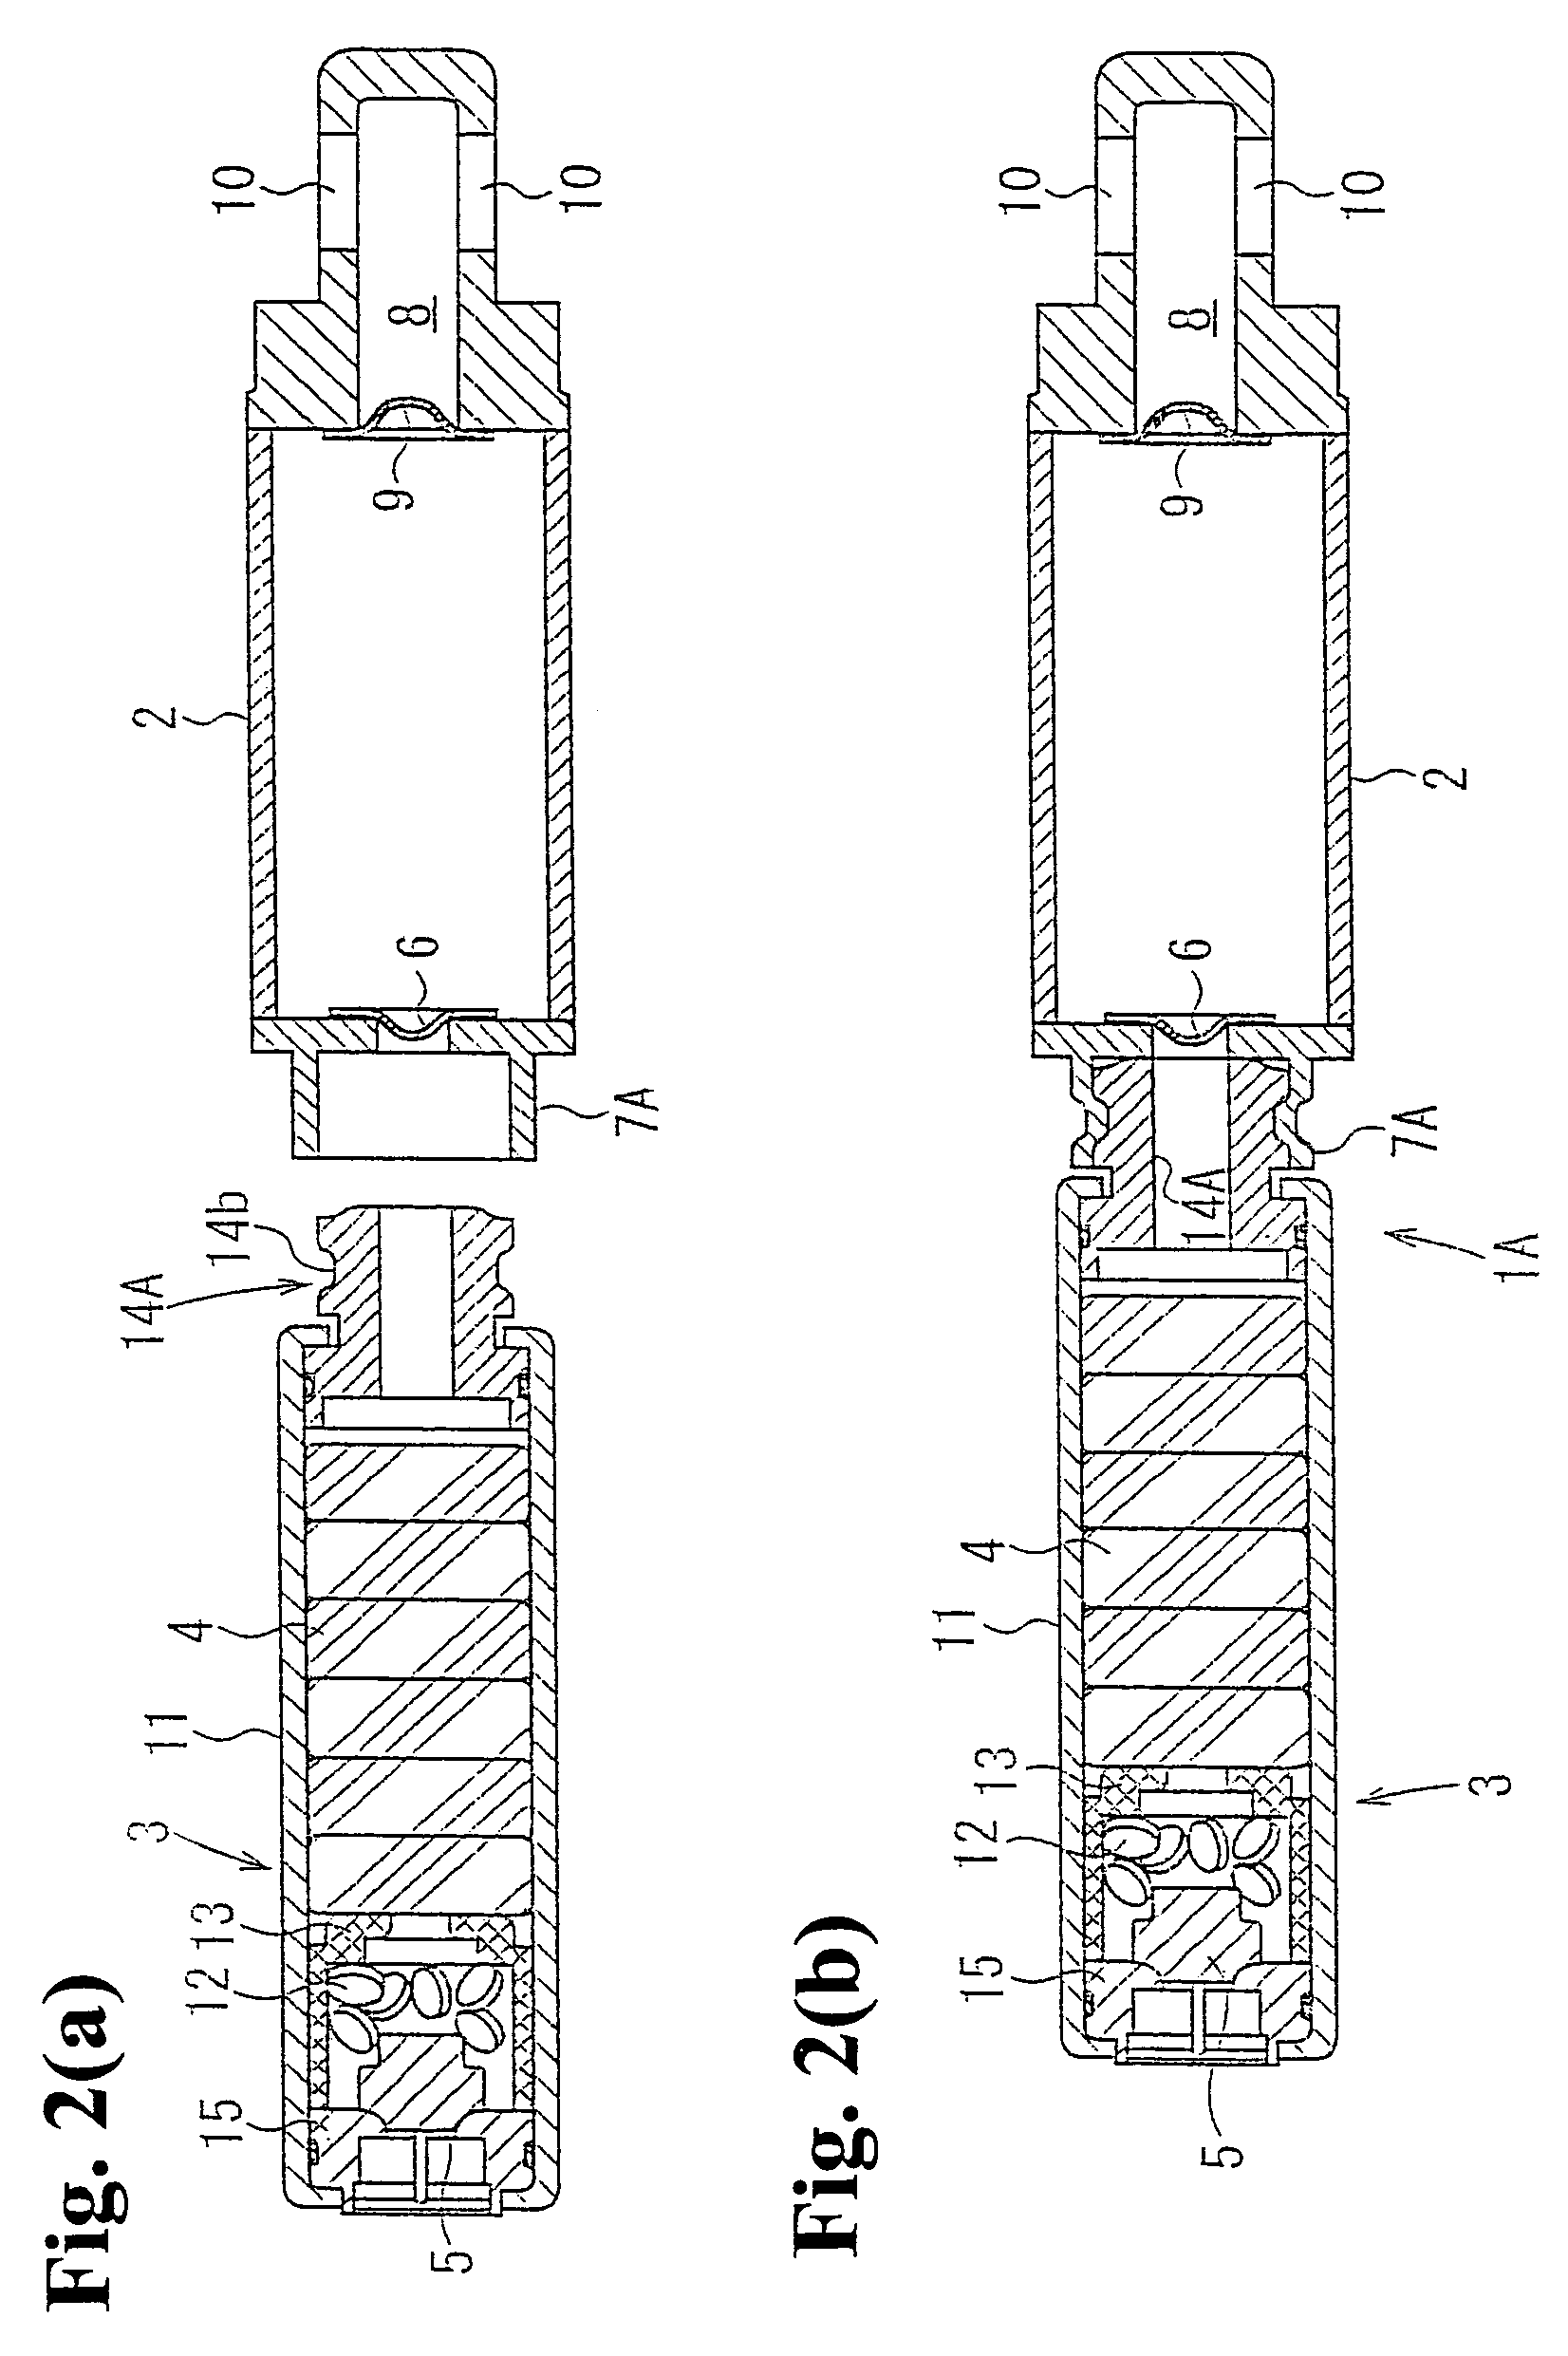 Inflator and airbag apparatus